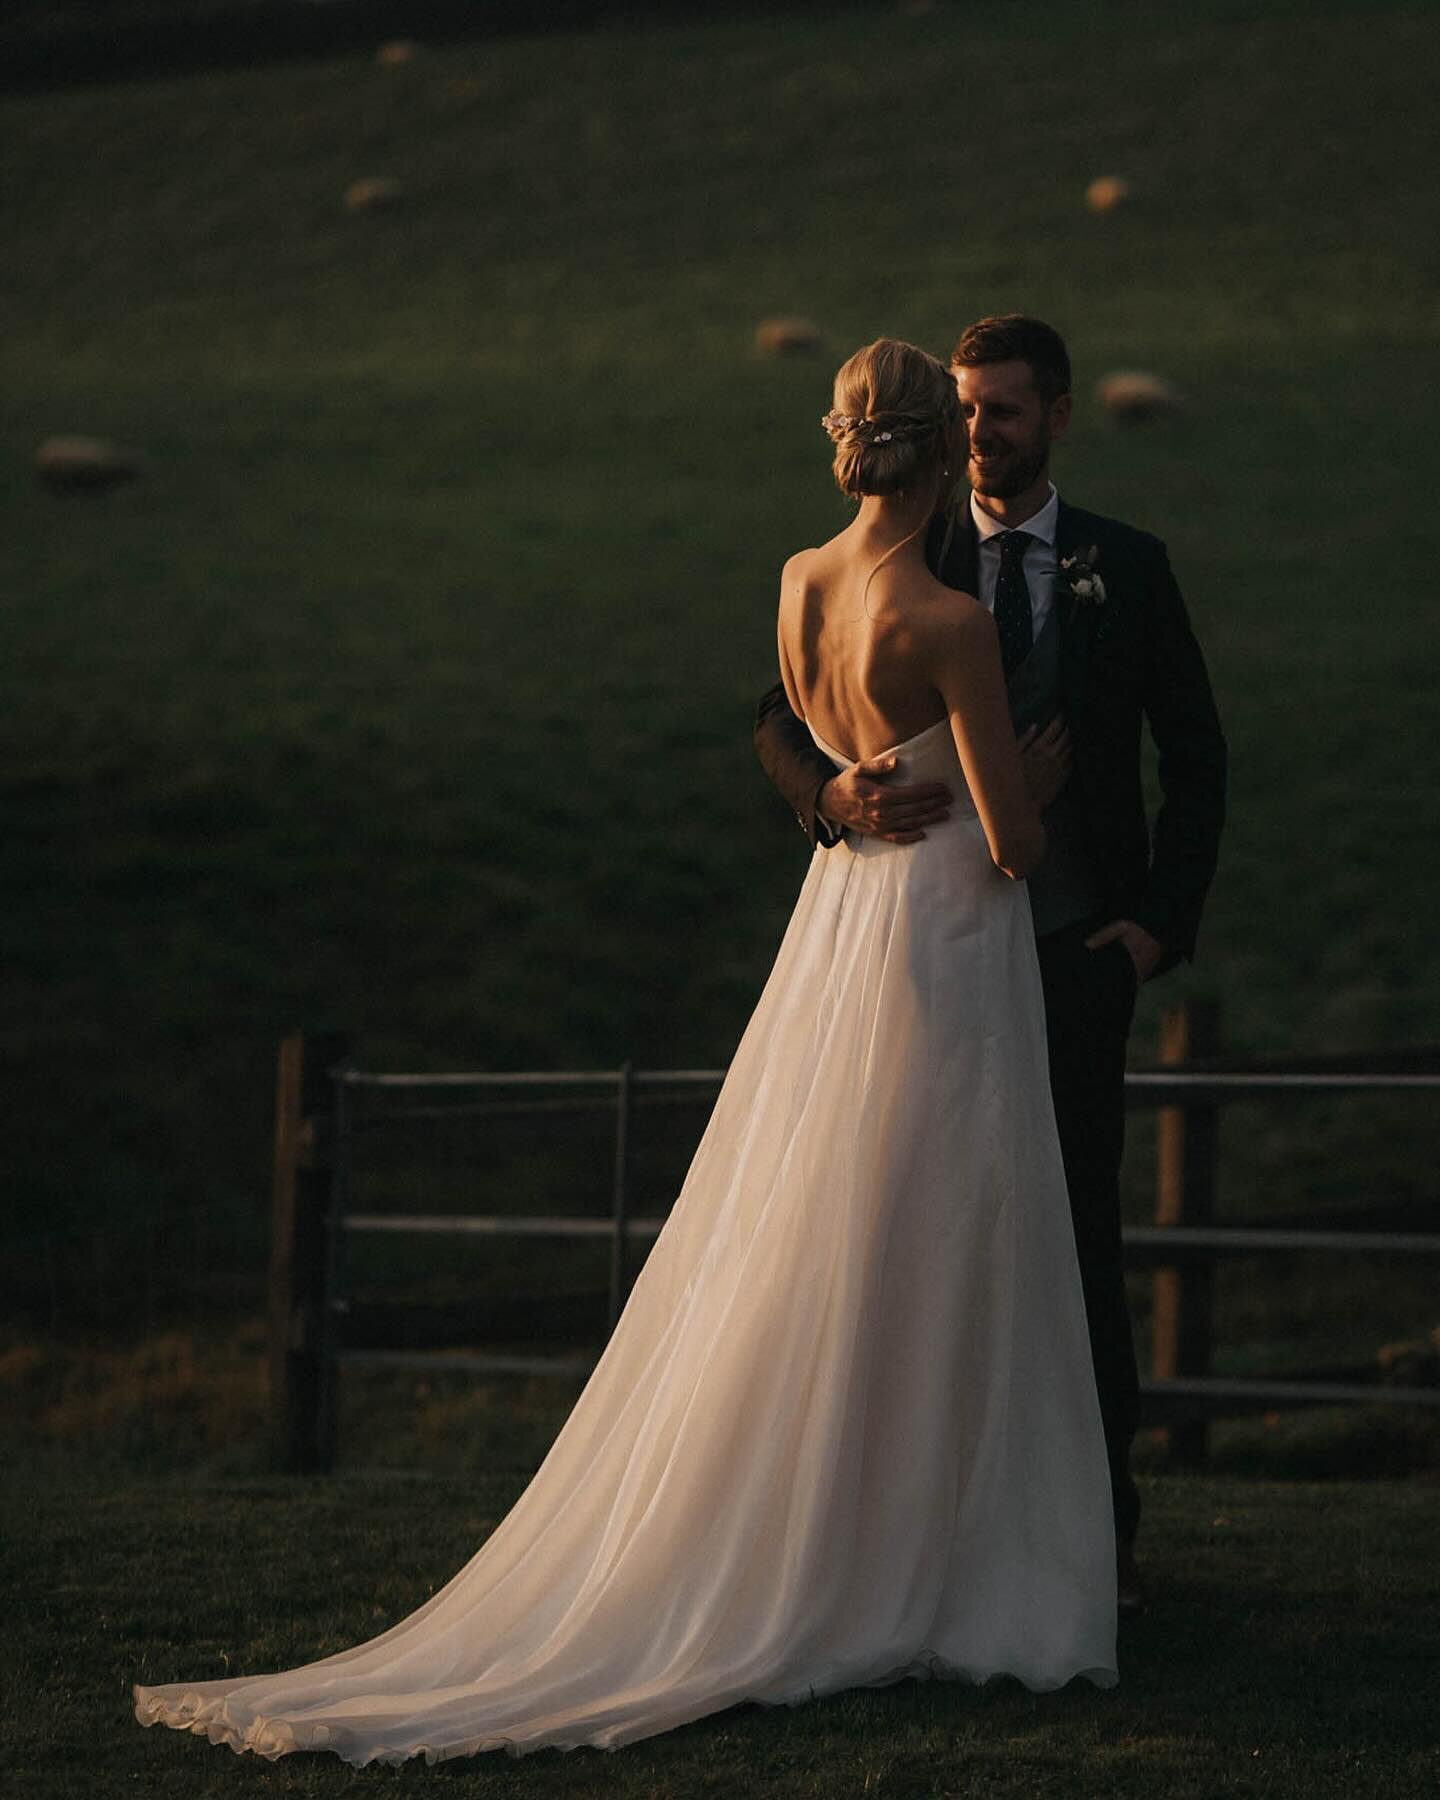 Very much looking forward to my first wedding of the year in May at @theoakbarnff 🙌🏻 a throwback to this beautiful evening with @wfullerphotography 😍